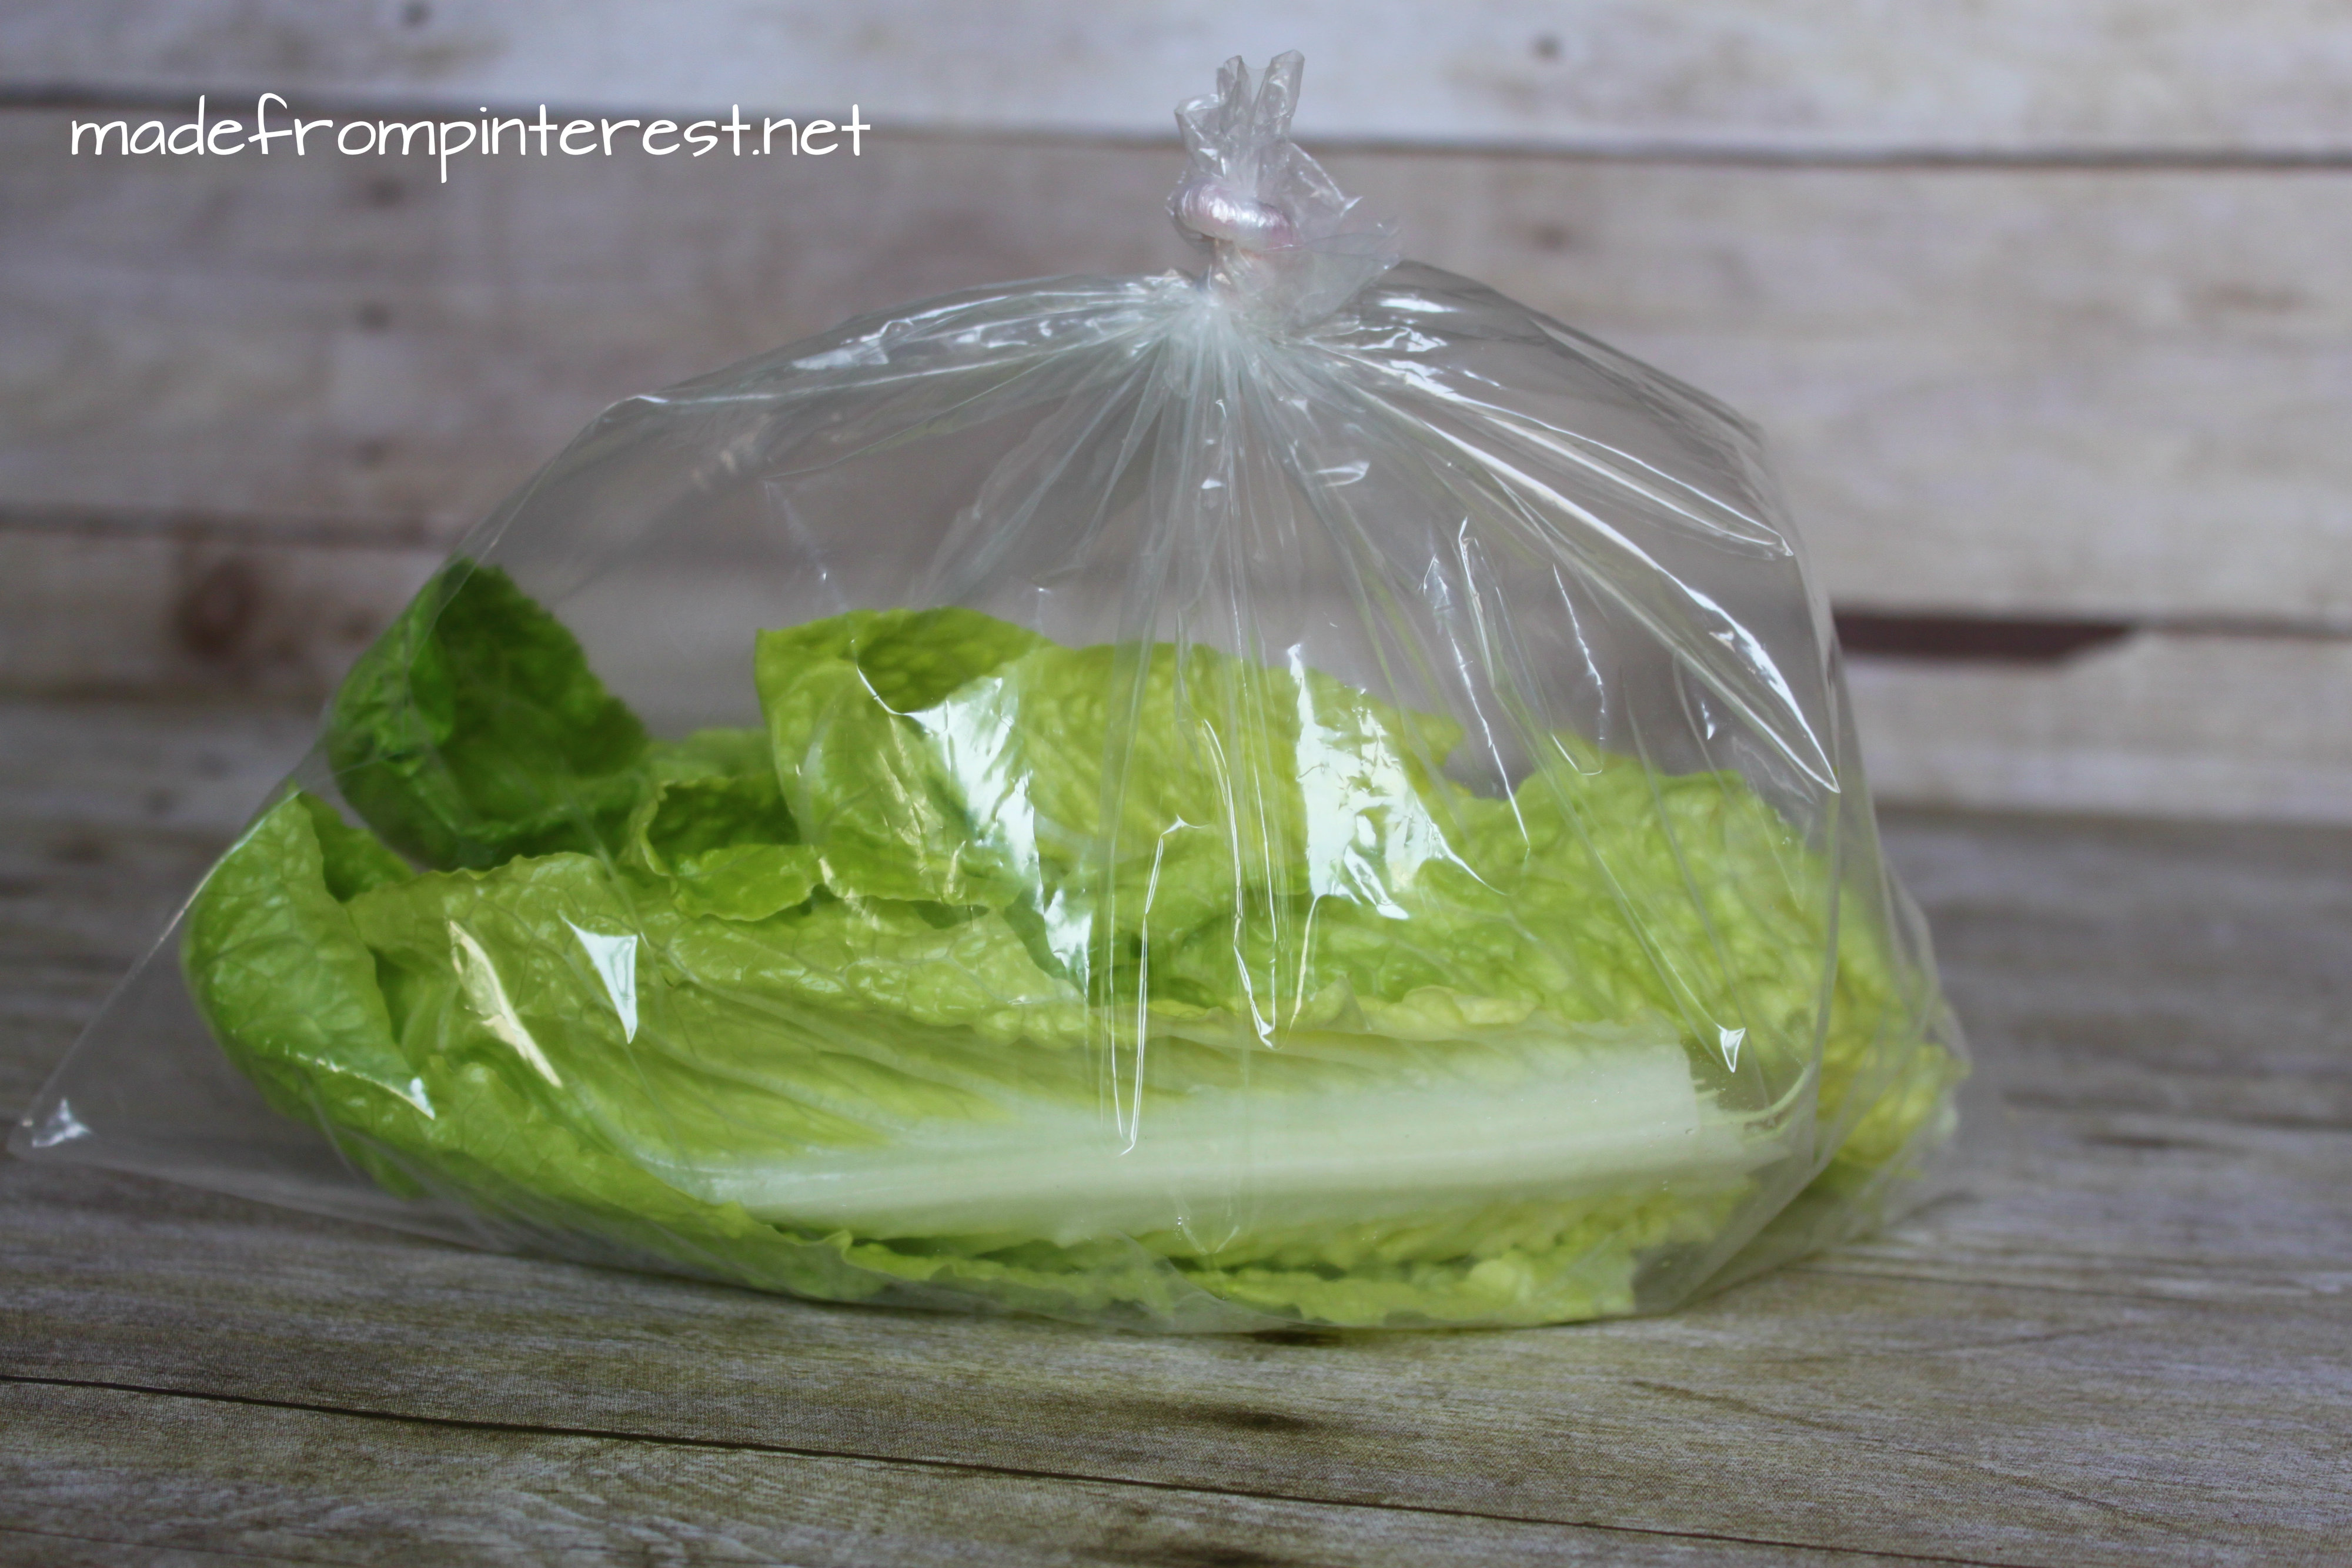 Madefrompinterest.net lettuce storage contest. Blowing air in a bag was a runner up